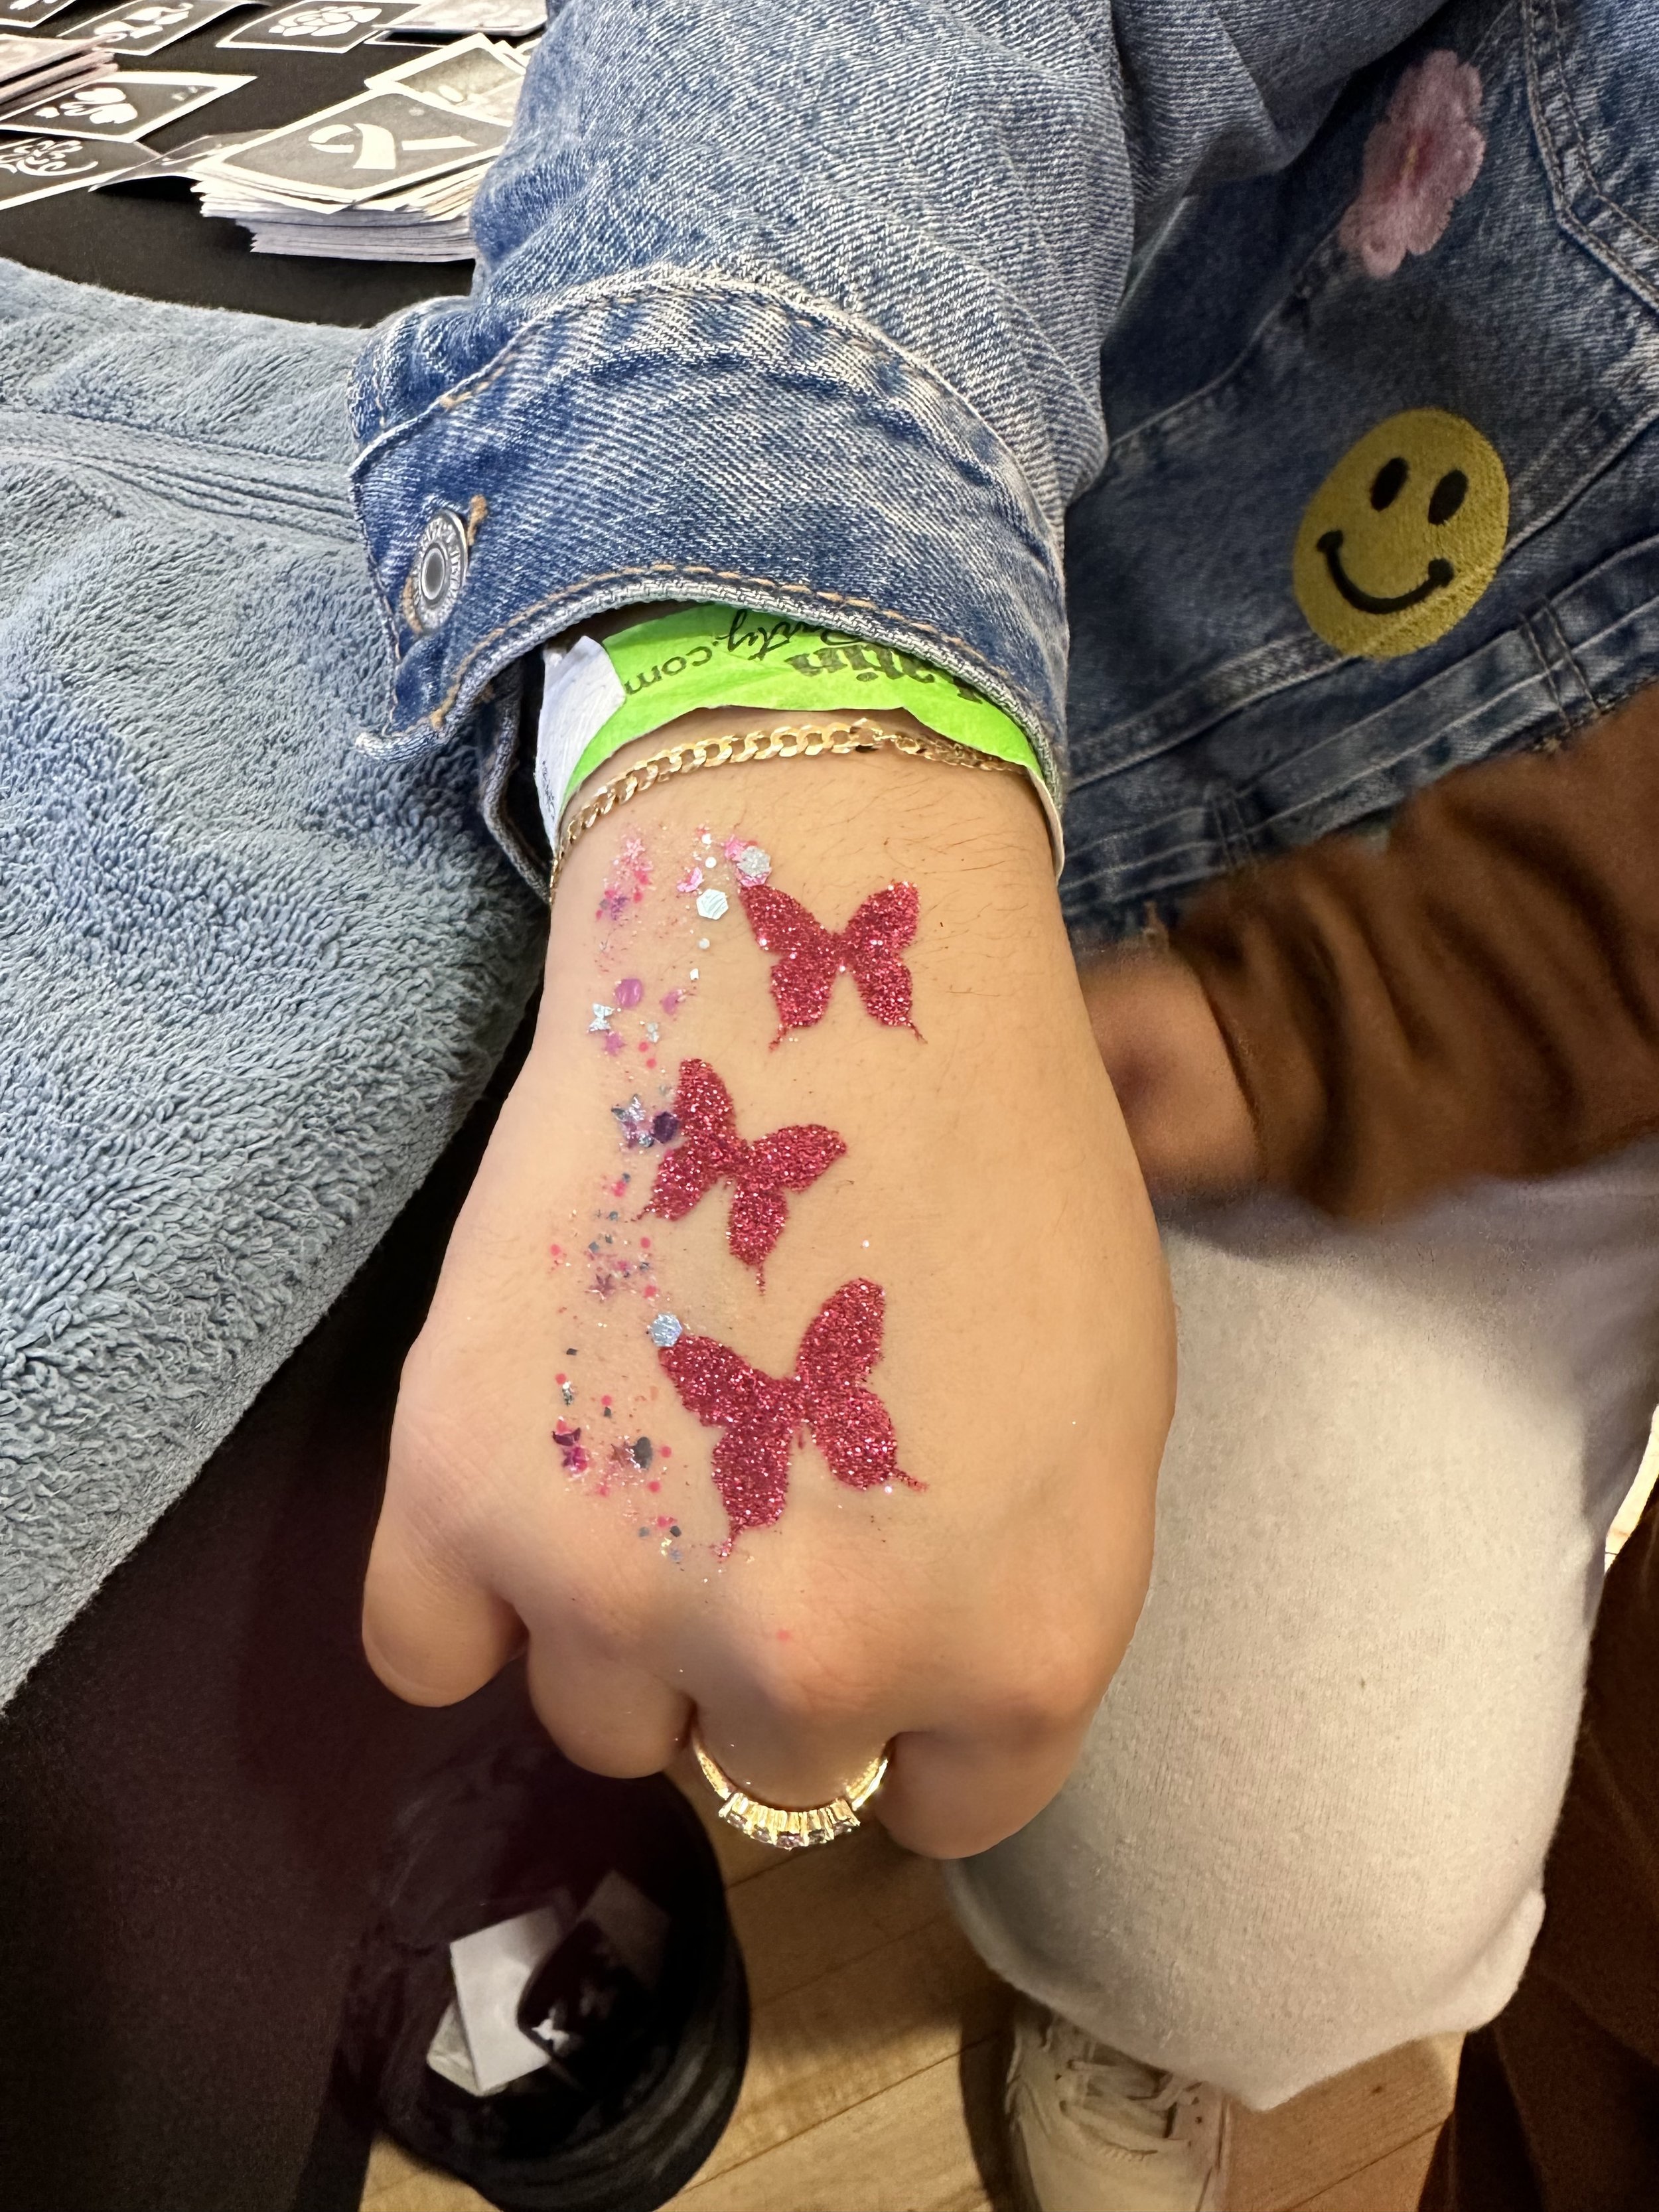 Glitter Tattoos for Kids Birthday Party near New York City and Westchester.jpg